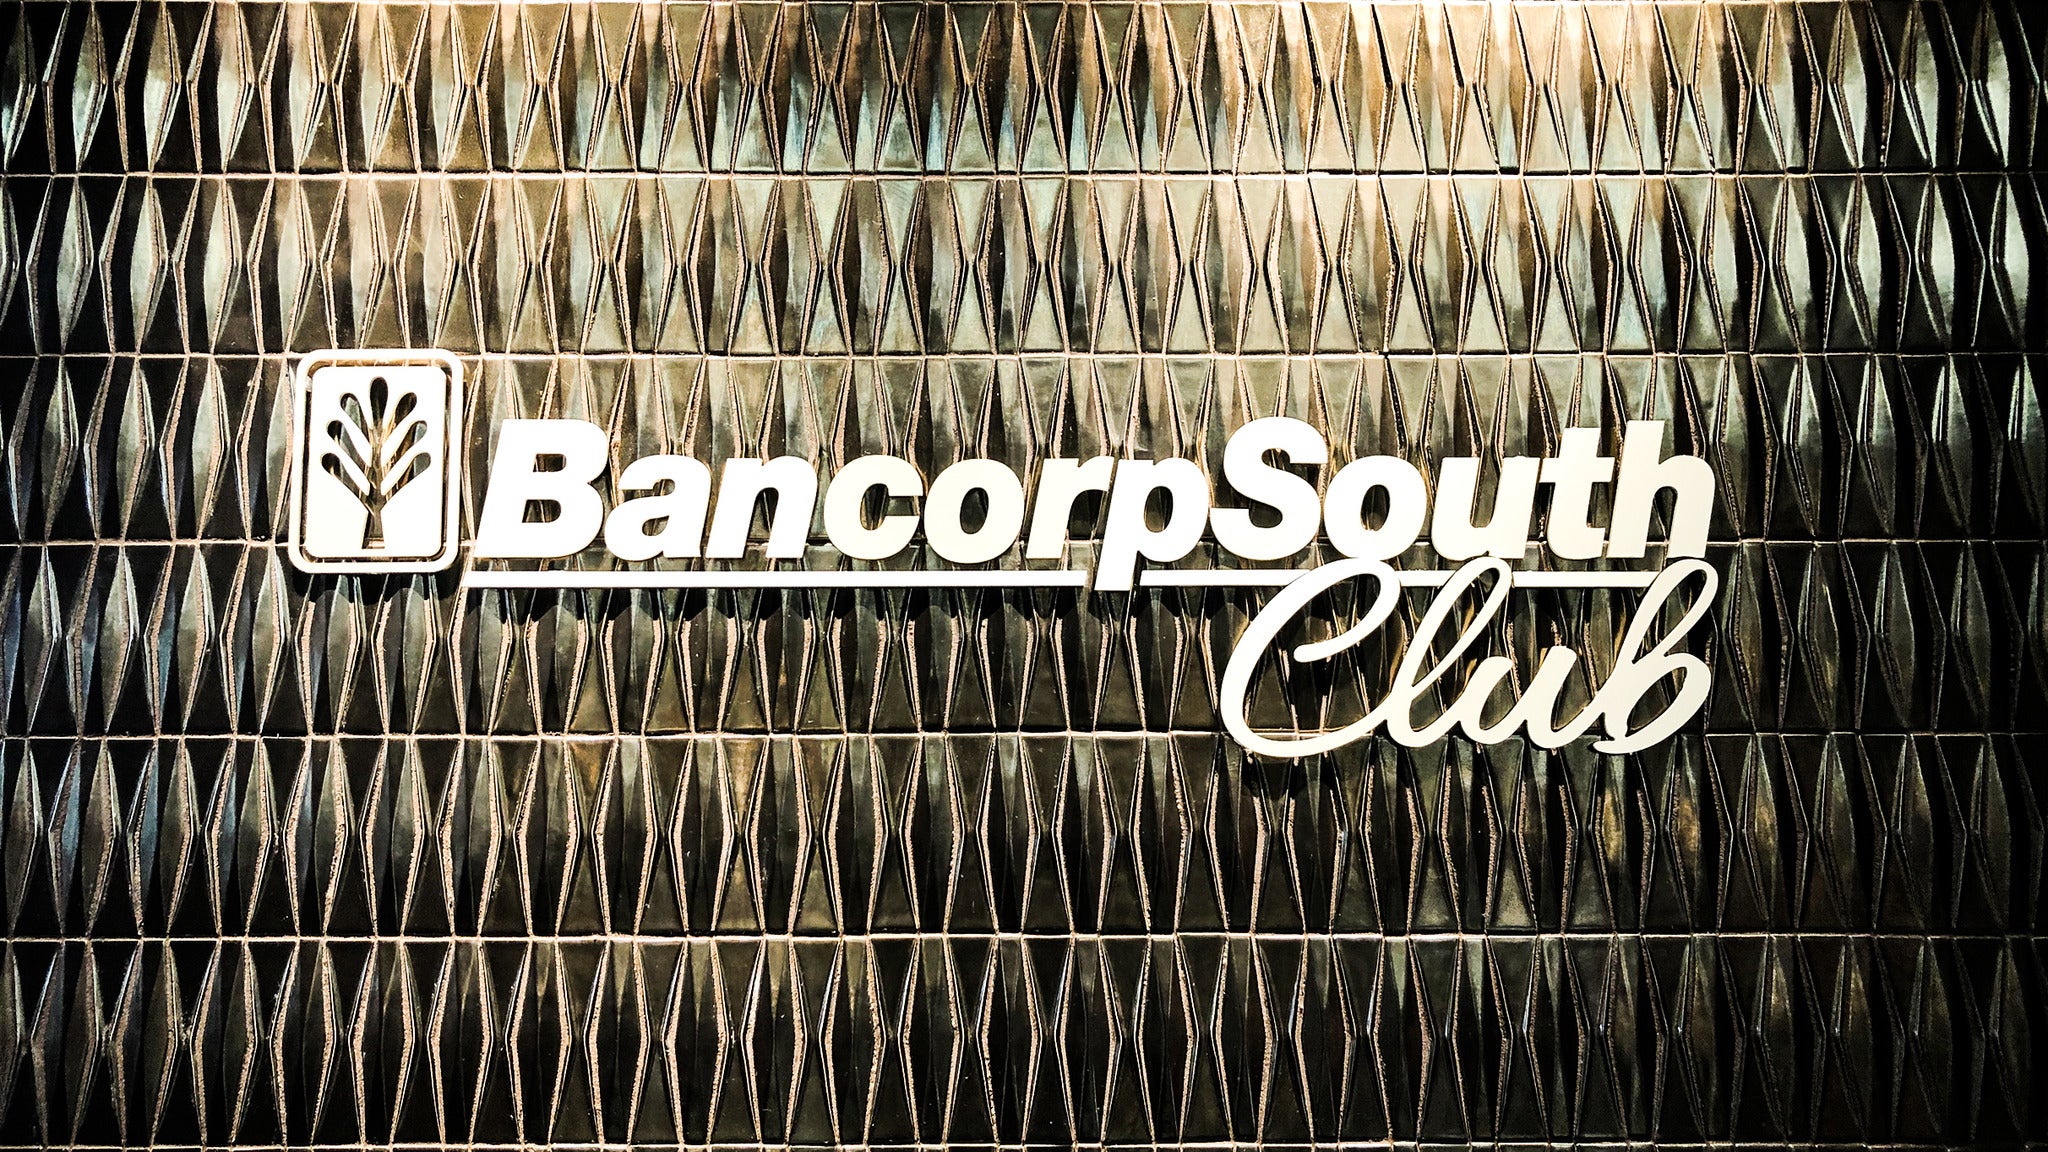 The Bancorpsouth Club Experience: Jul 31 2021 in Tupelo promo photo for Advance presale offer code